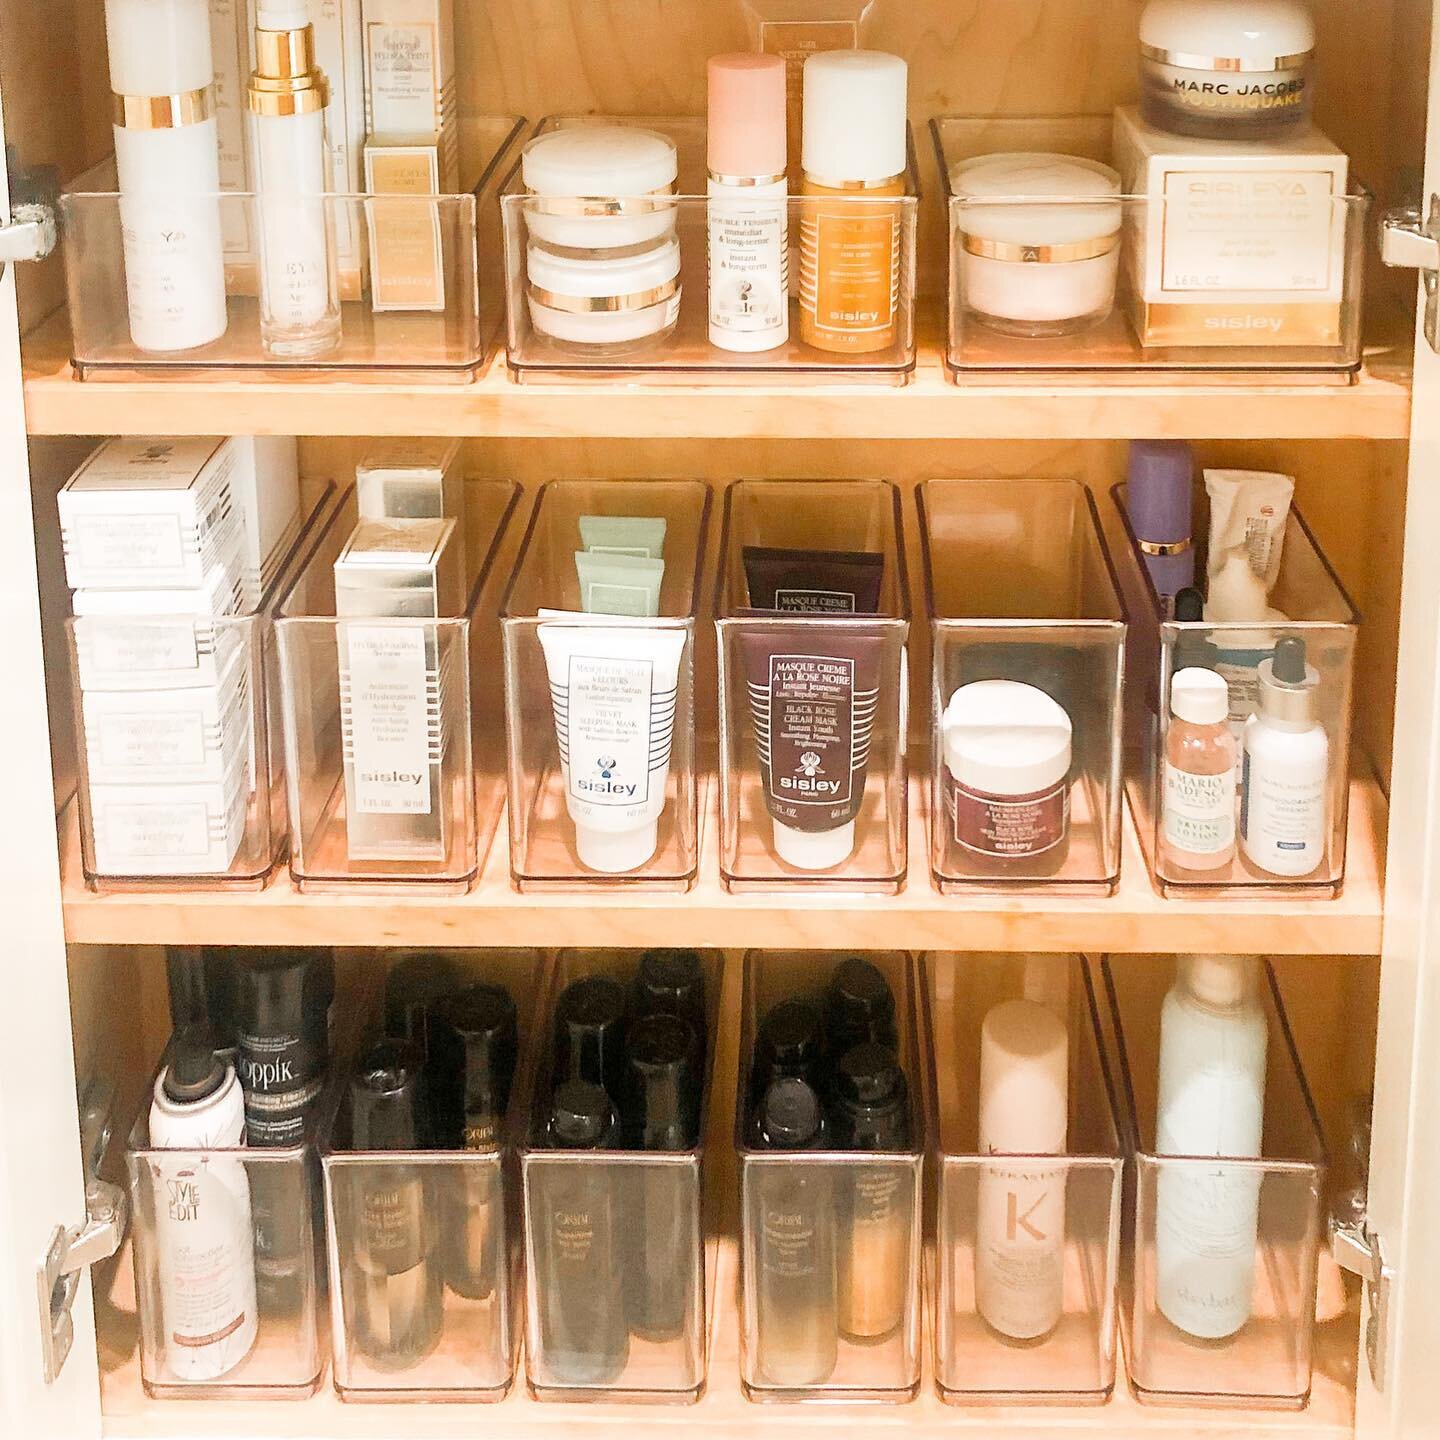 ✨ p r o d u c t ✨
Keep all of your bathroom items stocked using containers that fit the space perfectly. We can help you with any space in your home (or office!) 💫